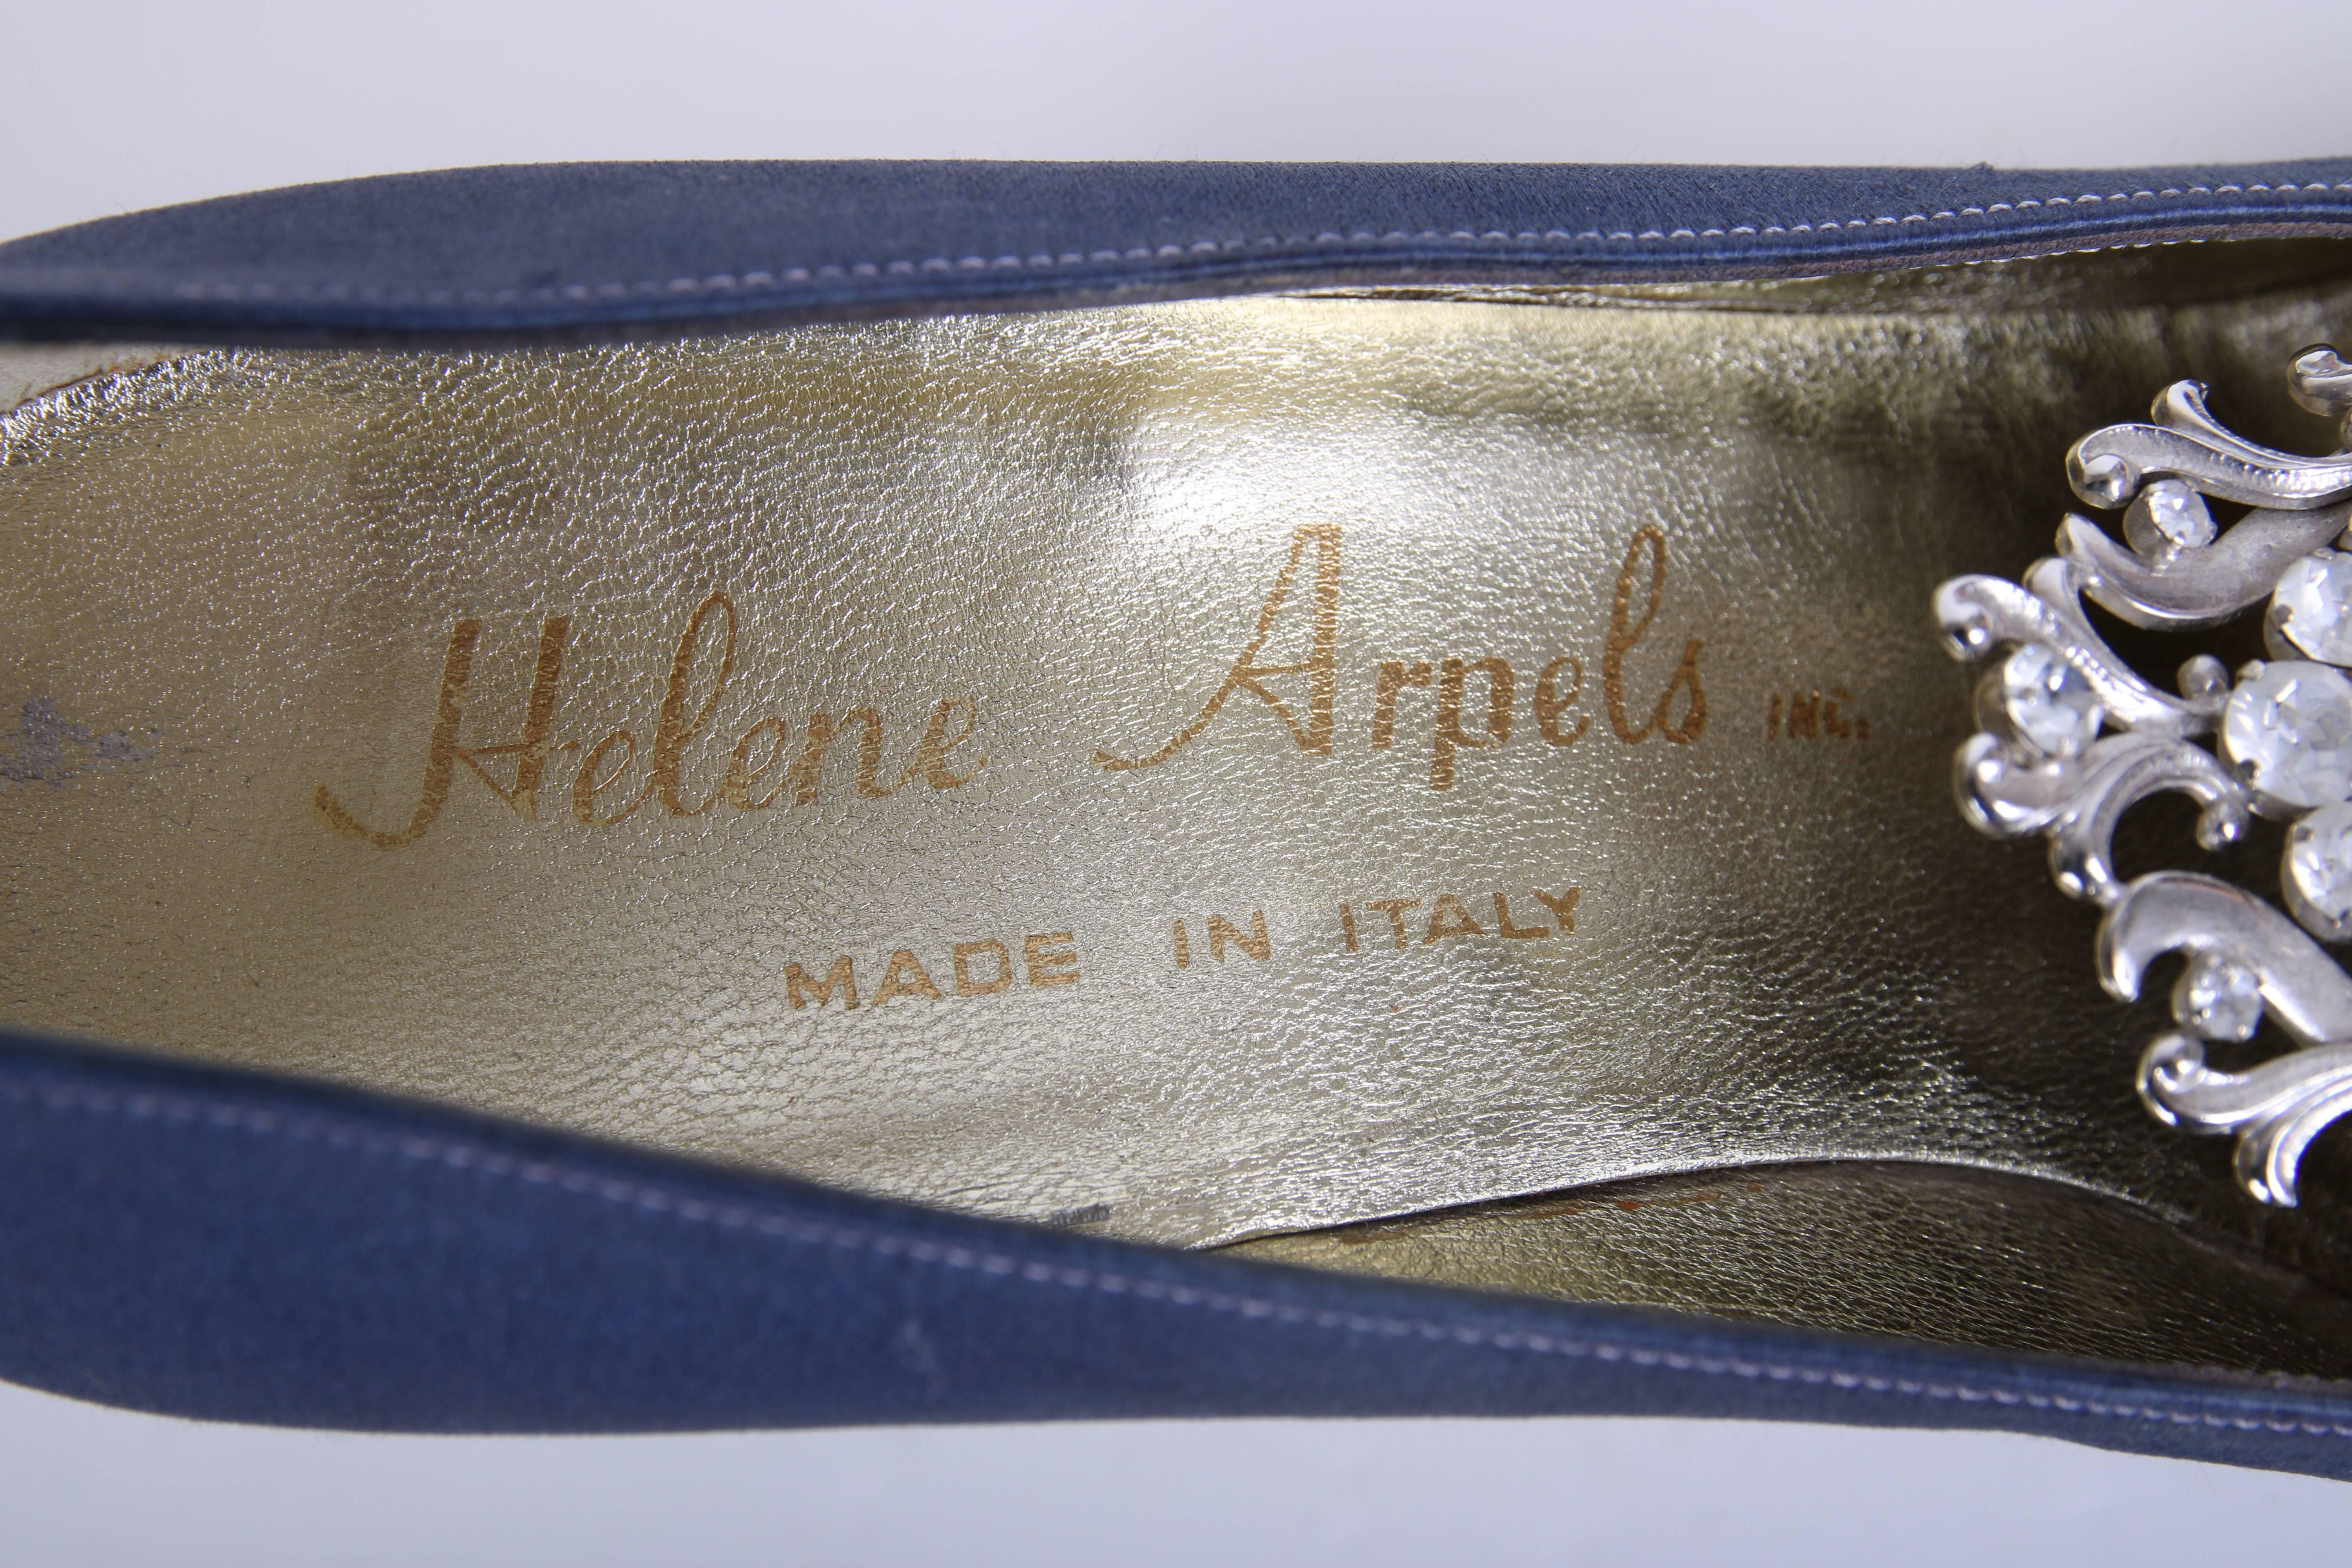 Women's Helene Arpels Custom Blue Silk Pumps with Jeweled Adornment at Toe